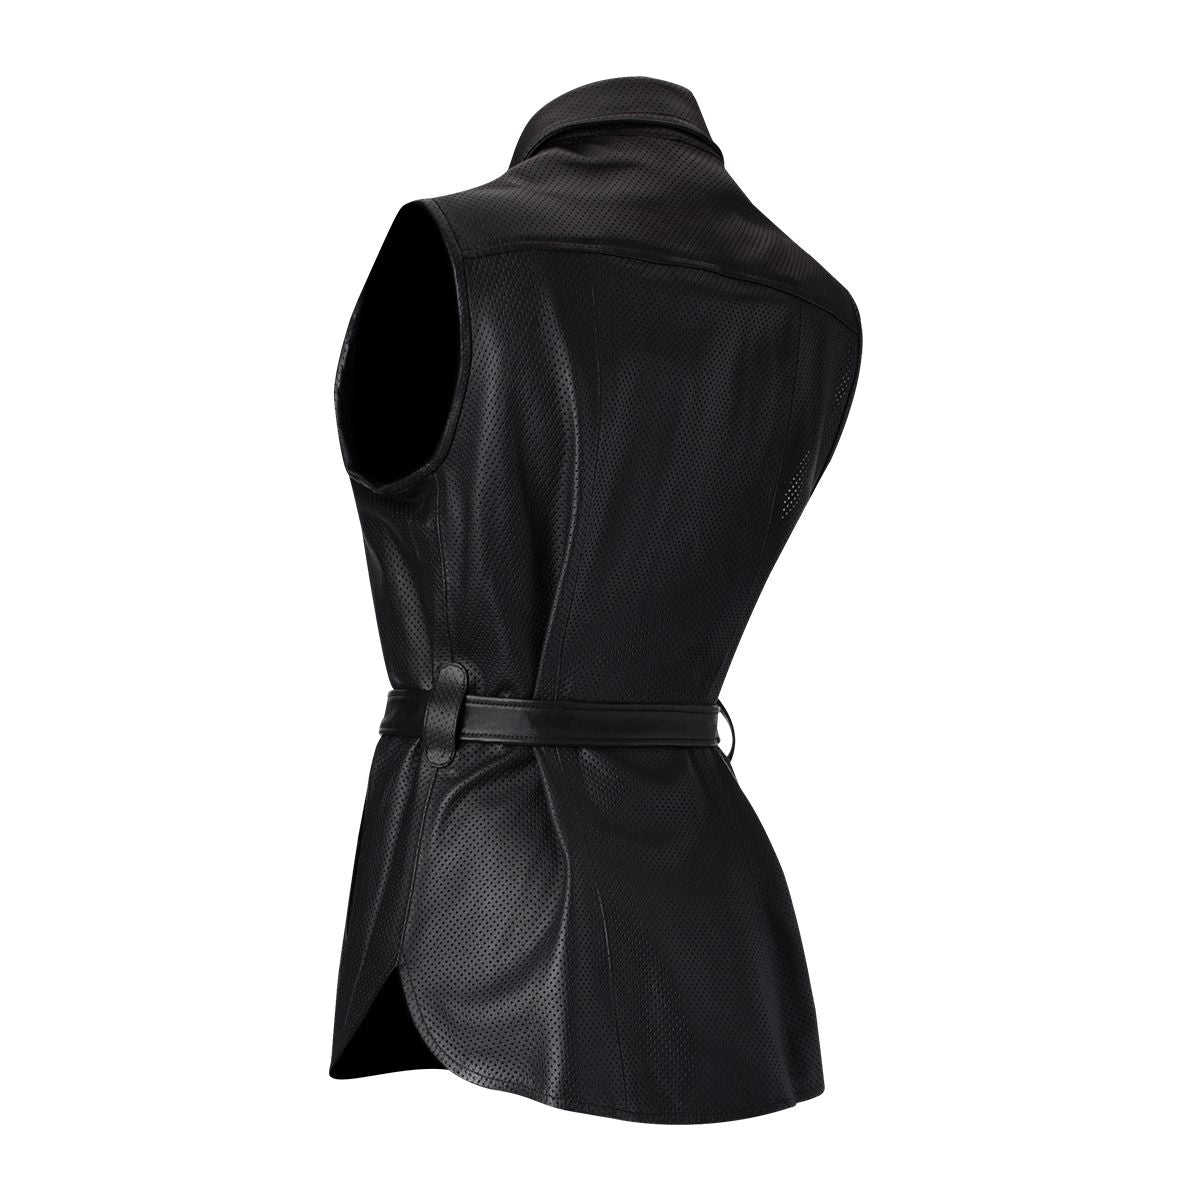 M265BOB - Cuadra black casual woven perforated leather vest for women-Kuet.us